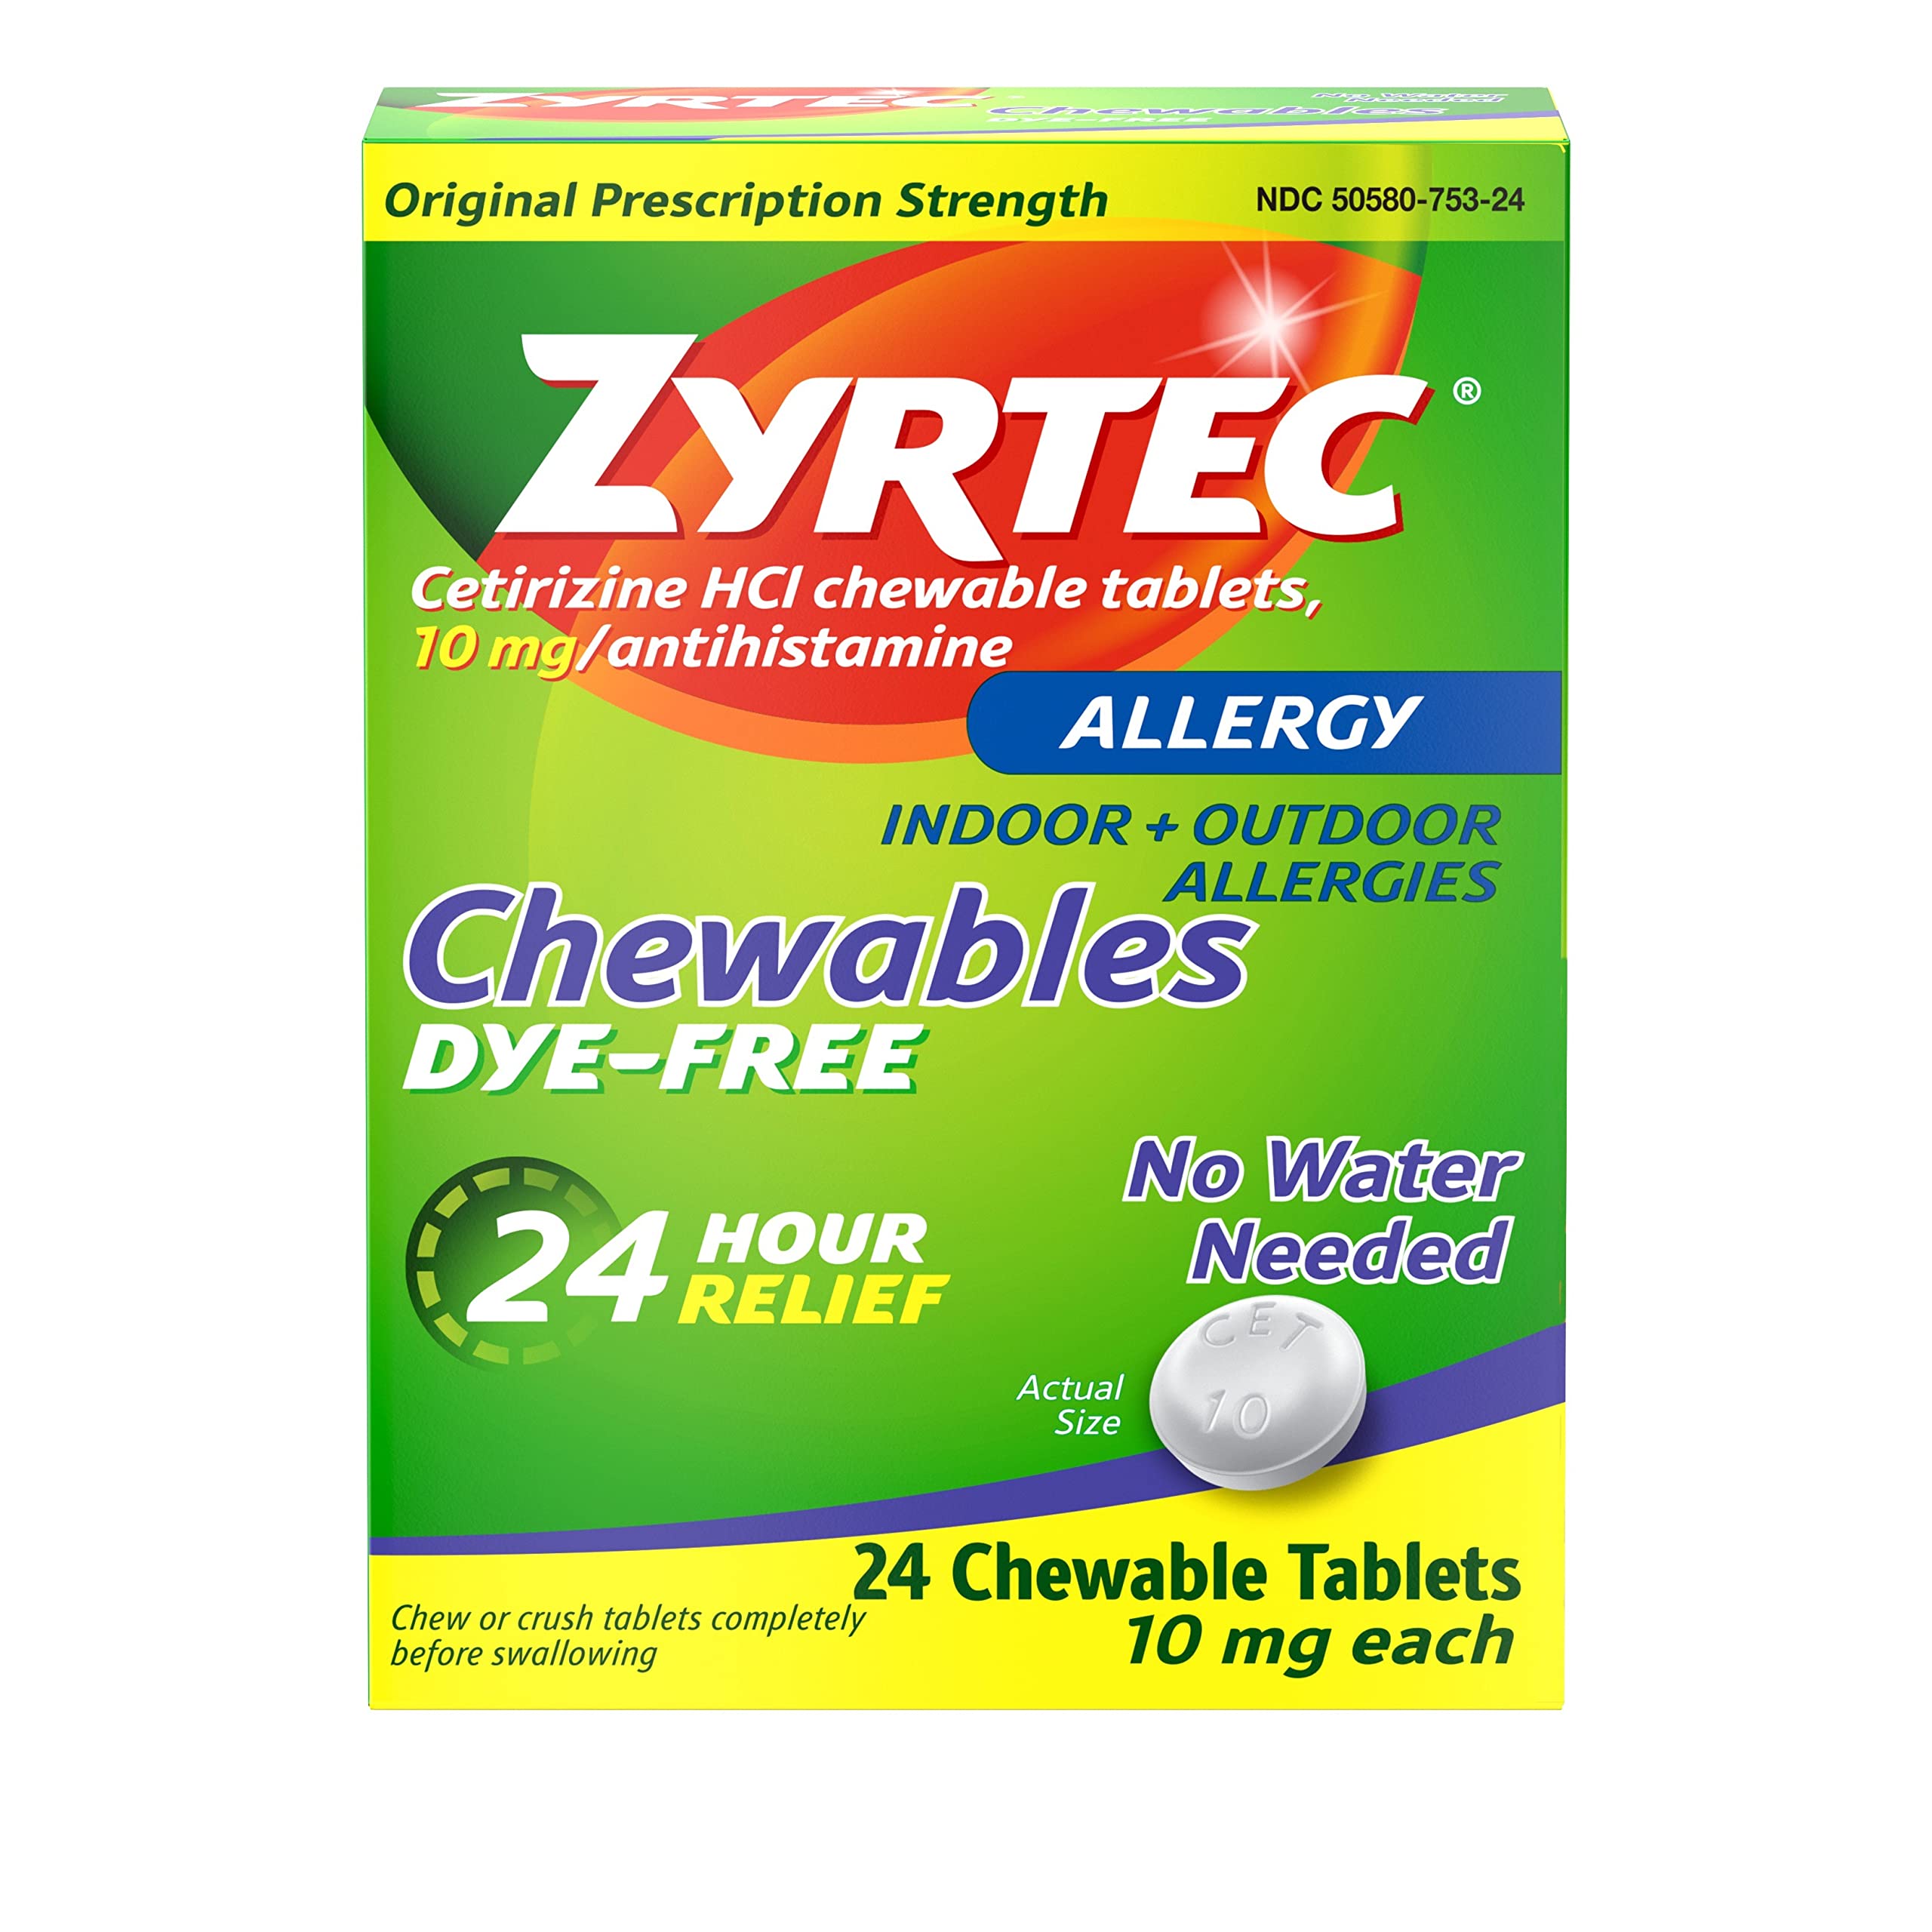 Zyrtec 24-Hour Berry Chewable Tablets: 10mg Cetirizine HCl per Tablet. Relieves Allergy Symptoms (Indoor, Outdoor, Hay Fever). Dye-Free. 24 Count [Subscribe & Save] $9.3